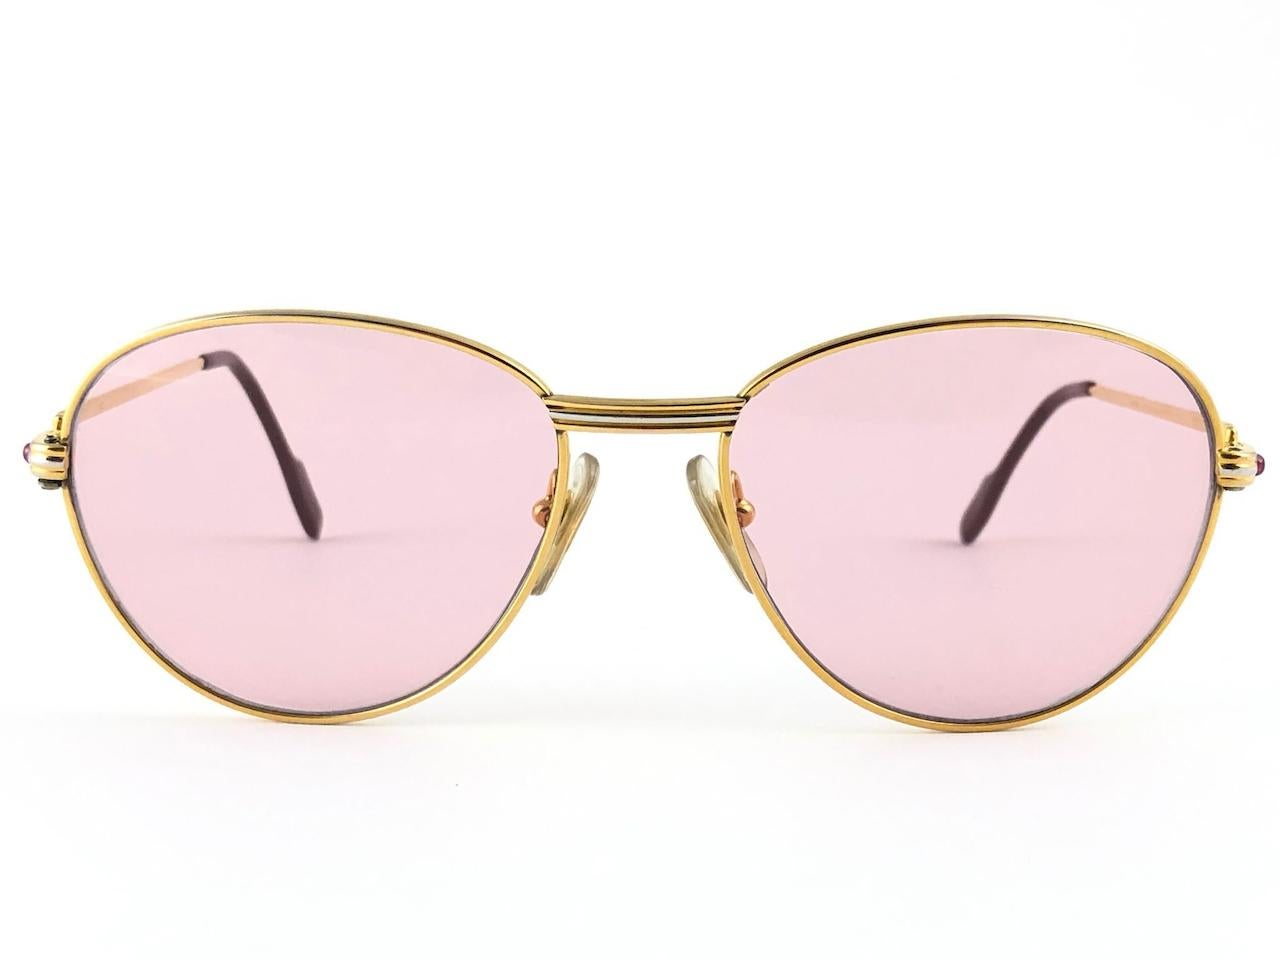 
In Excellent condition Cartier Louis rounded sunglasses with 2 rubies on the side of the frame. Mauve  (uv protection) lenses. Frame is with the famous yellow and white gold accents on the front and on both sides. All hallmarks, from 1989. Red